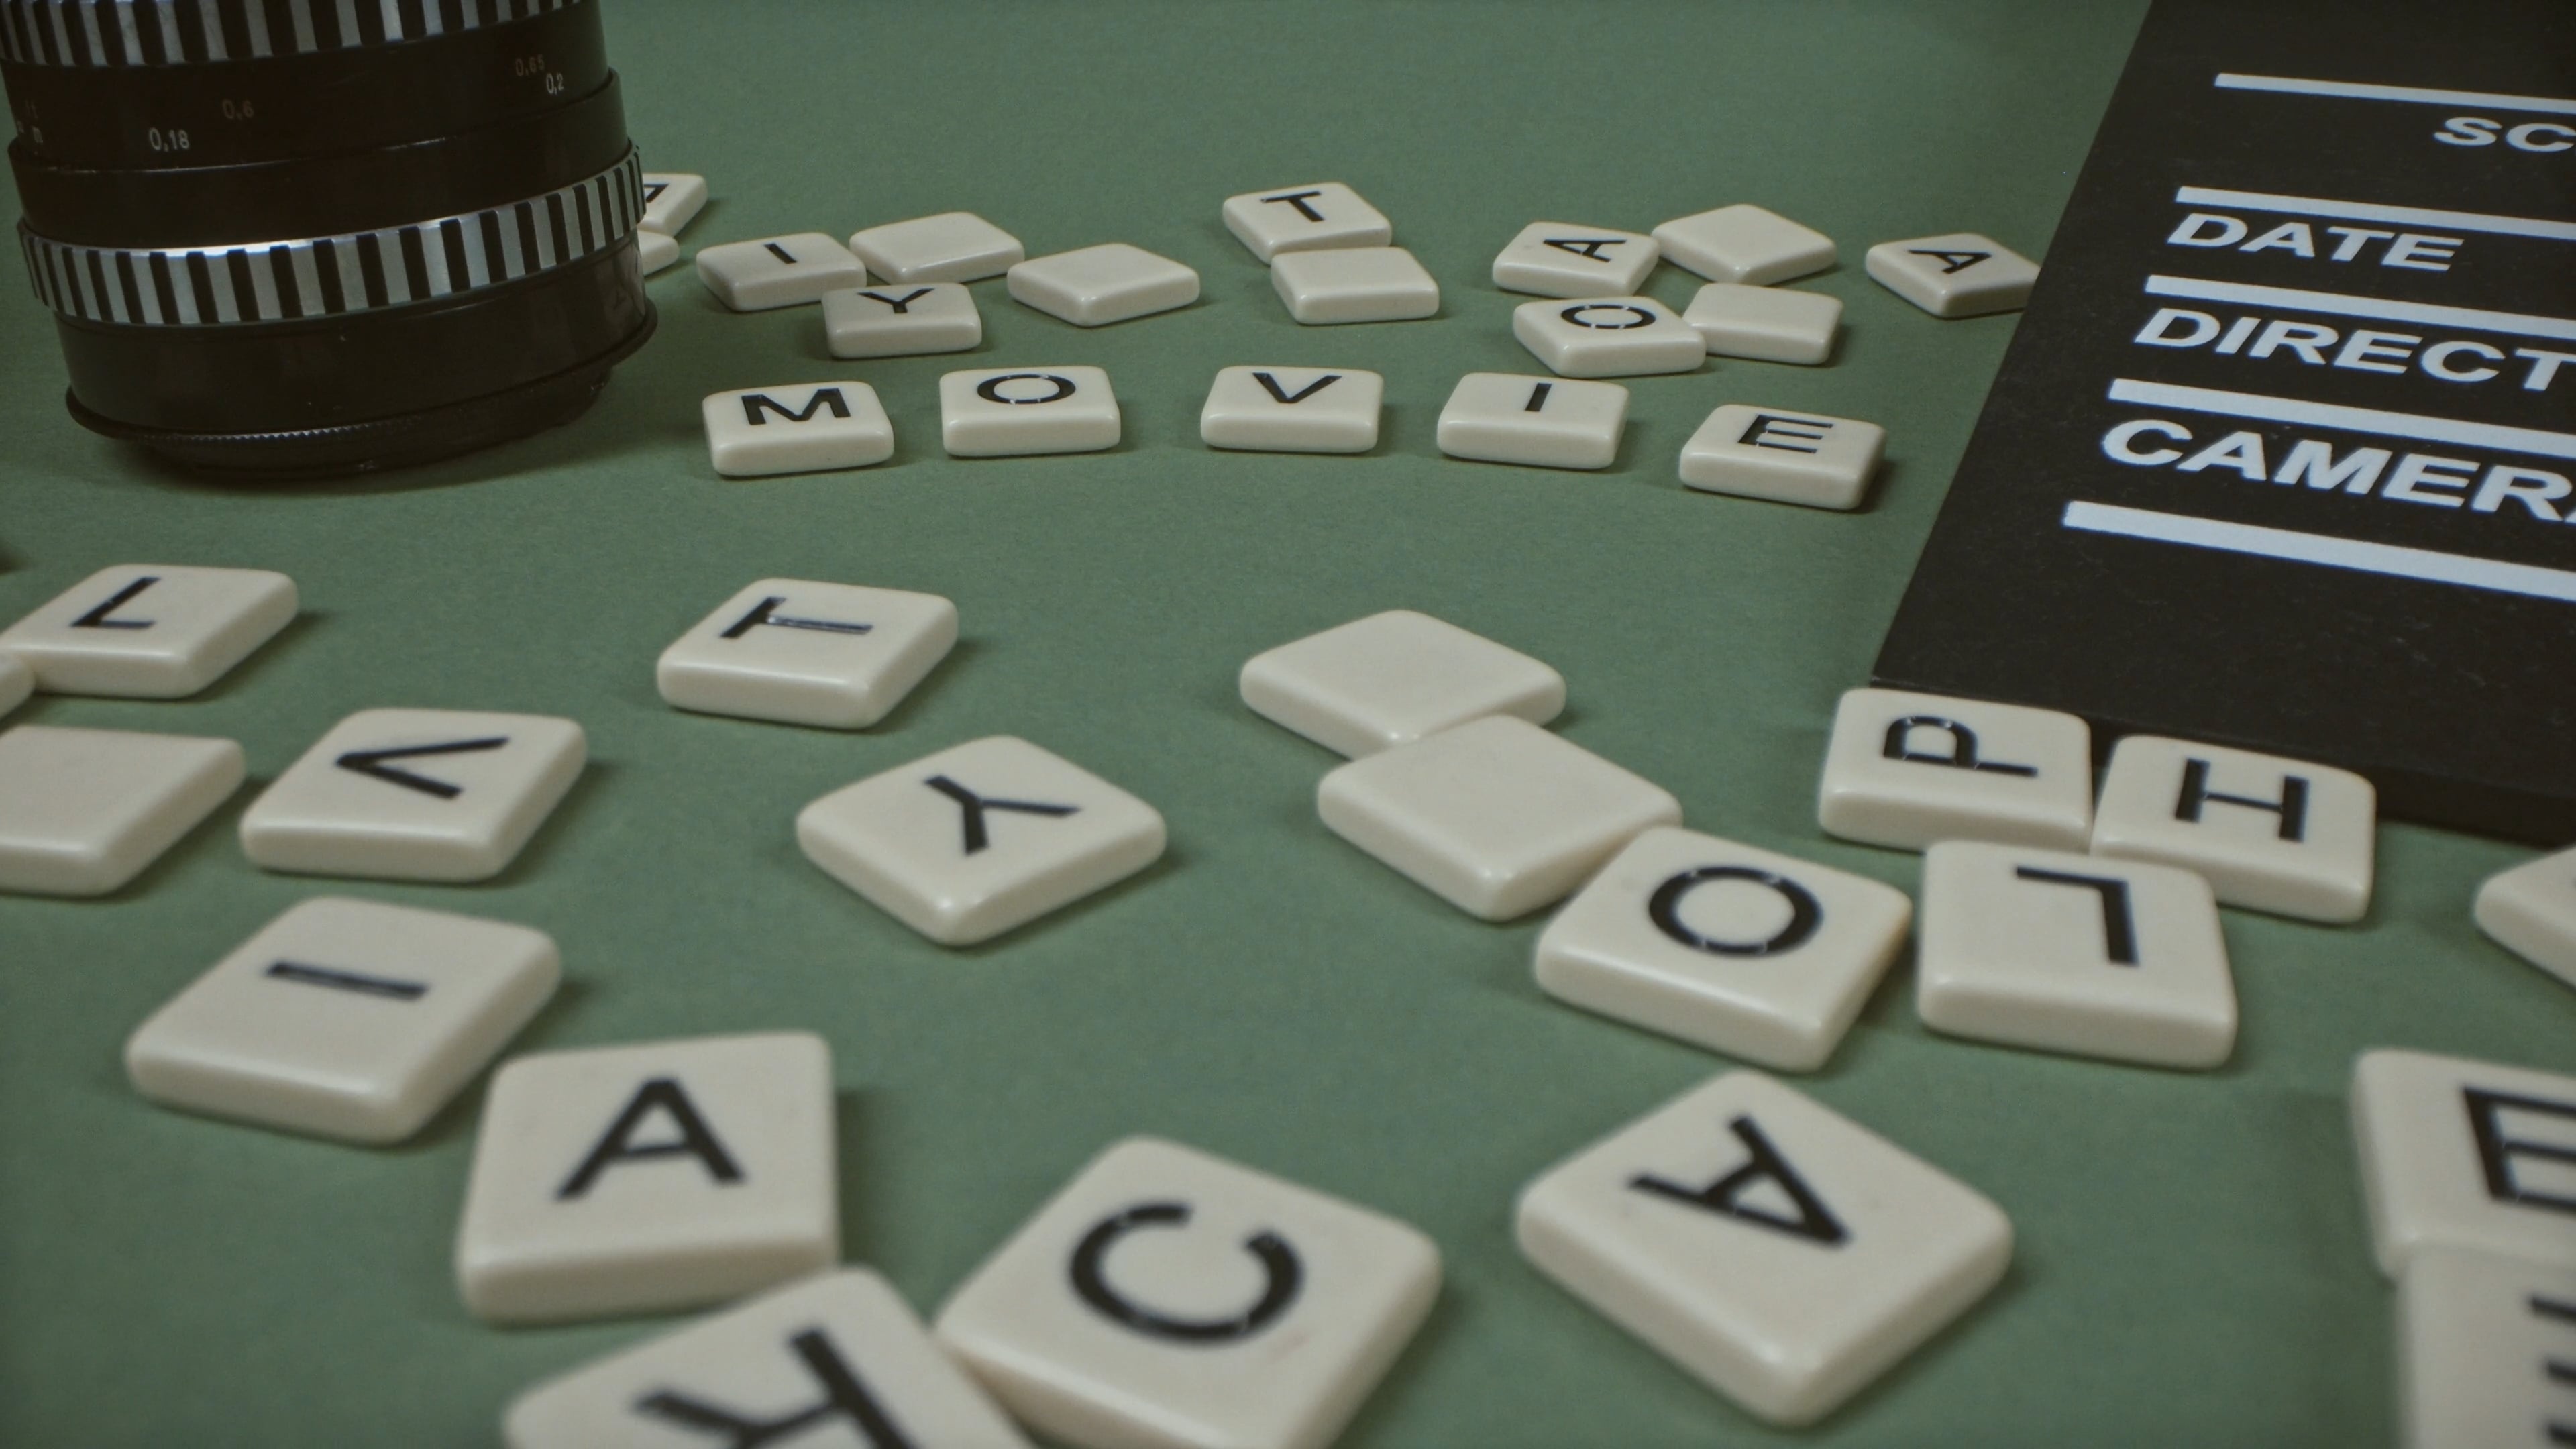 Scrabble: Movie, Professional lens, Recreational board activity, Family game. 3840x2160 4K Wallpaper.